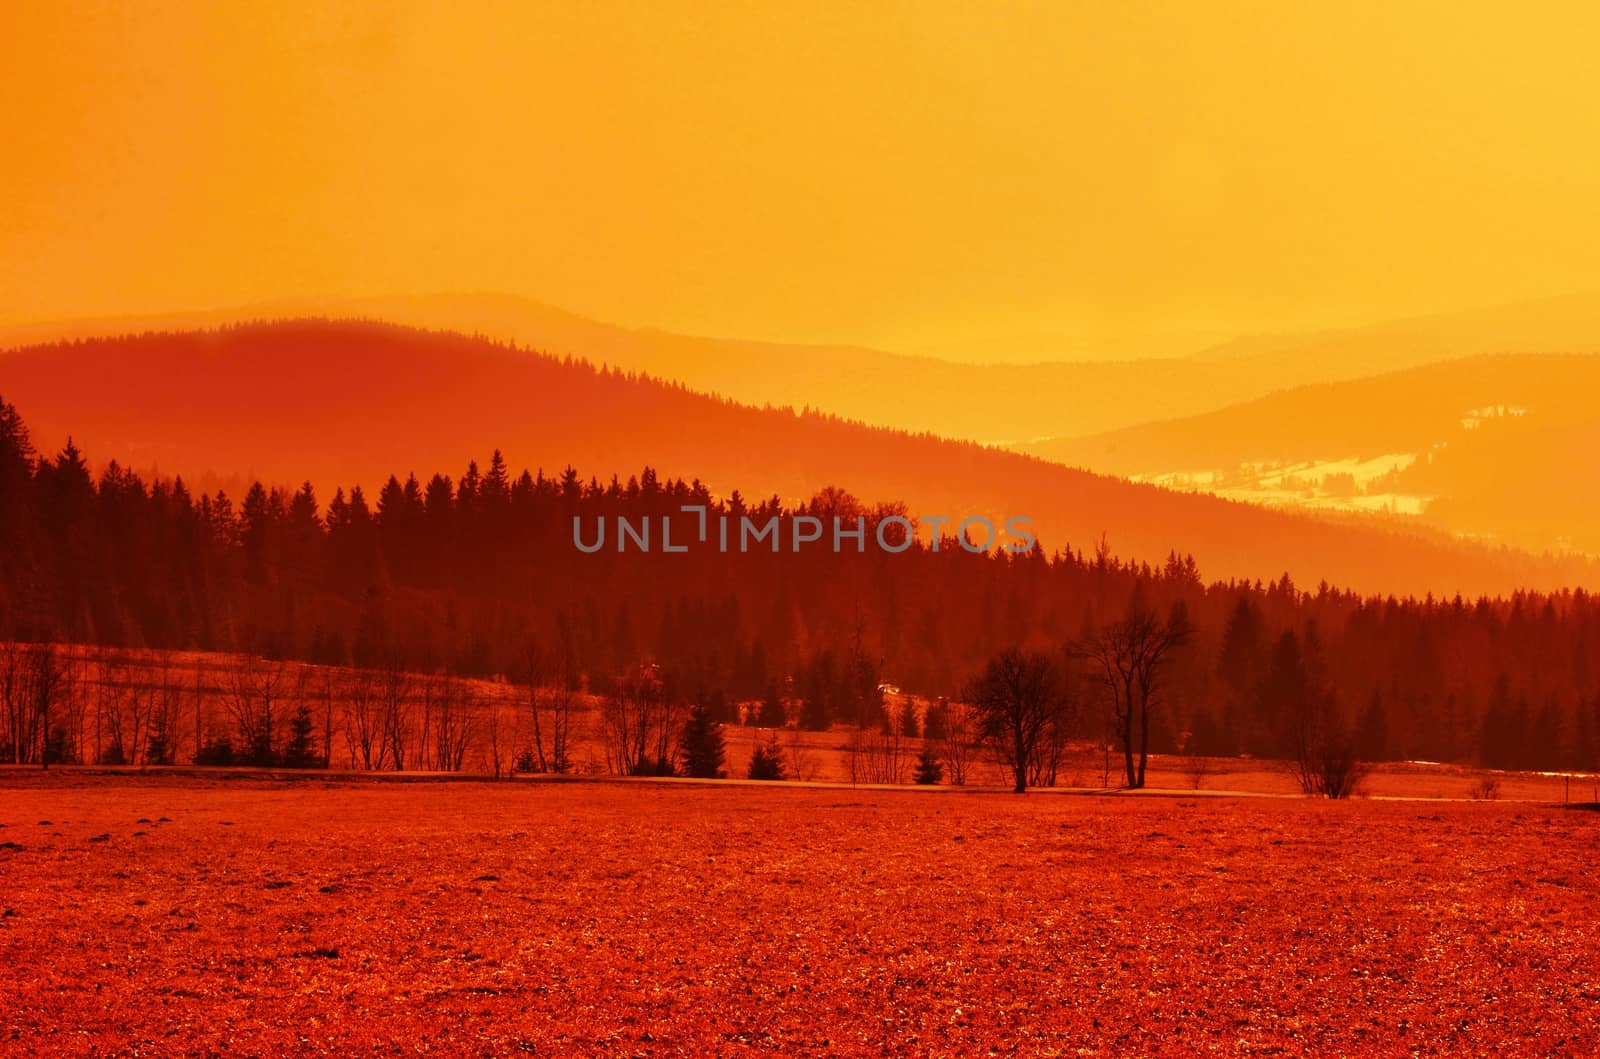 Awesome orange landscape of valley with forest and mountains in back.